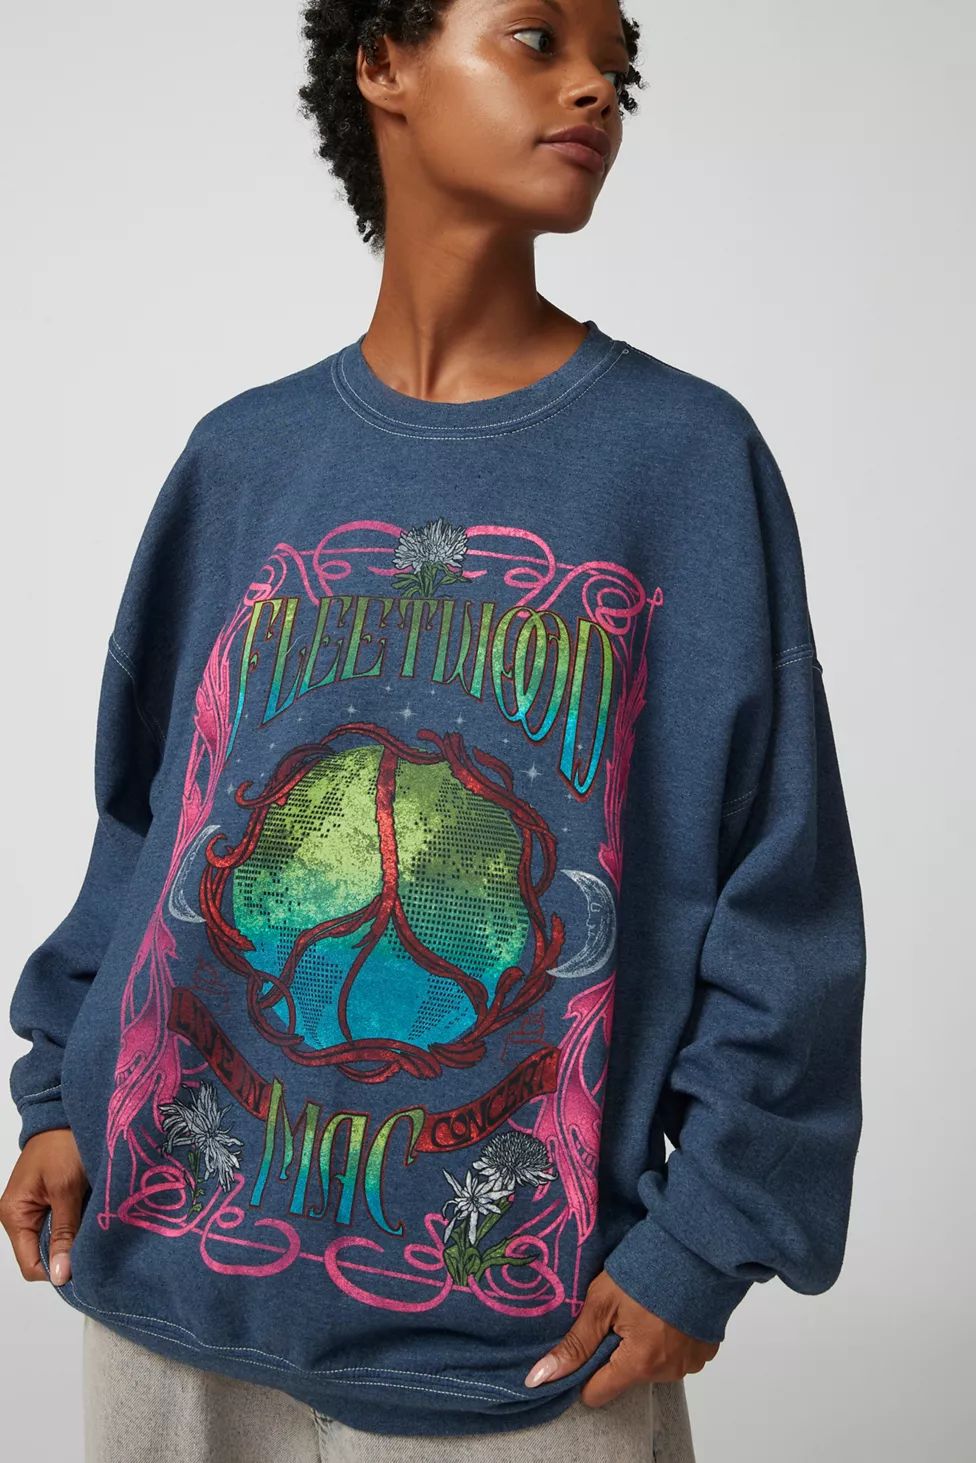 Fleetwood Mac Pullover Sweatshirt | Urban Outfitters (US and RoW)